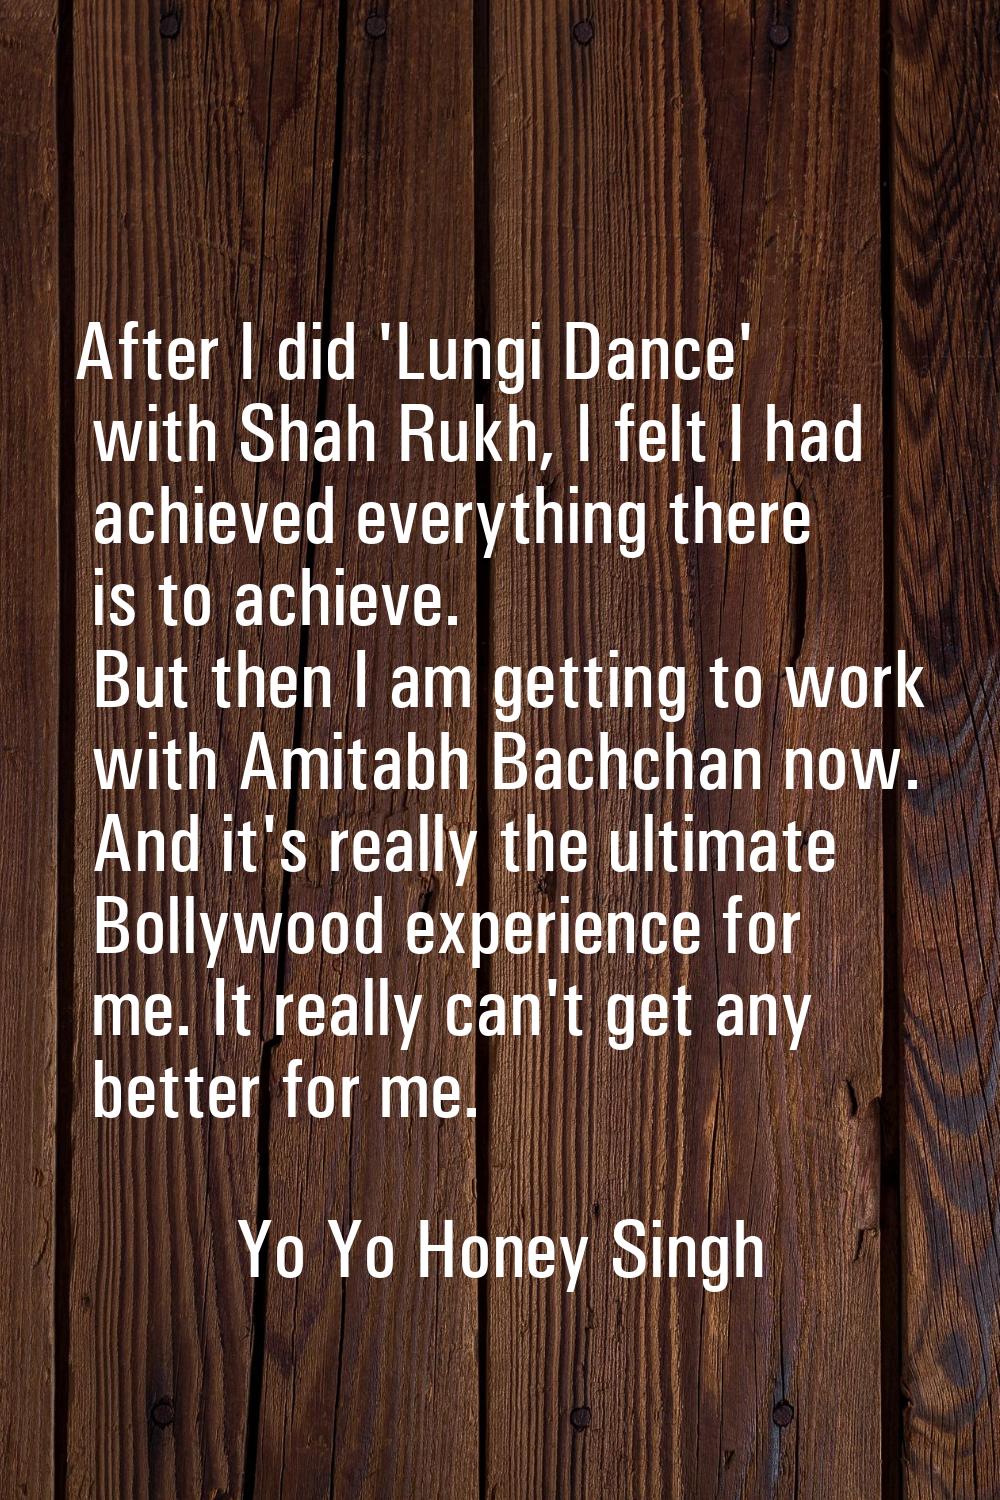 After I did 'Lungi Dance' with Shah Rukh, I felt I had achieved everything there is to achieve. But